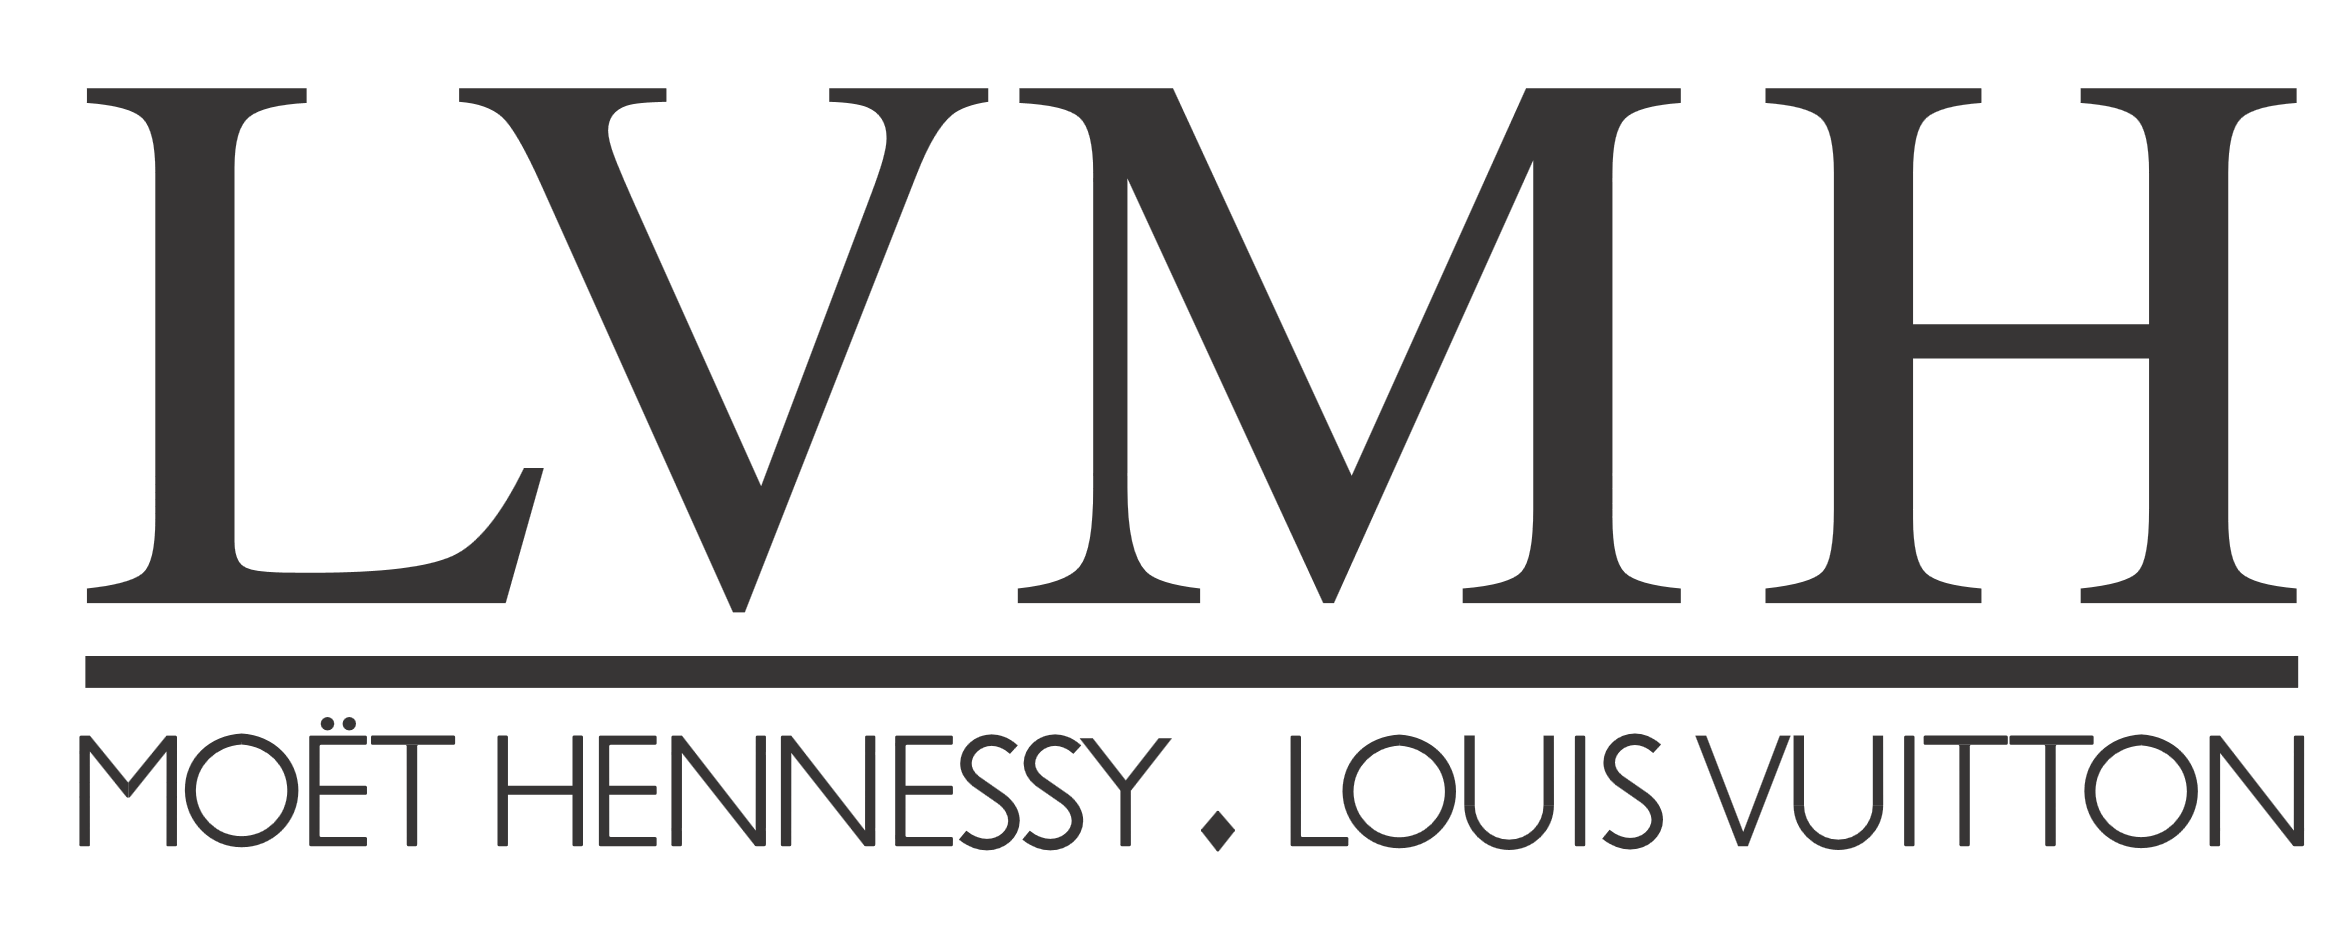 Lvmh Moet Hennessy Louis Vuitton Dividend Yield